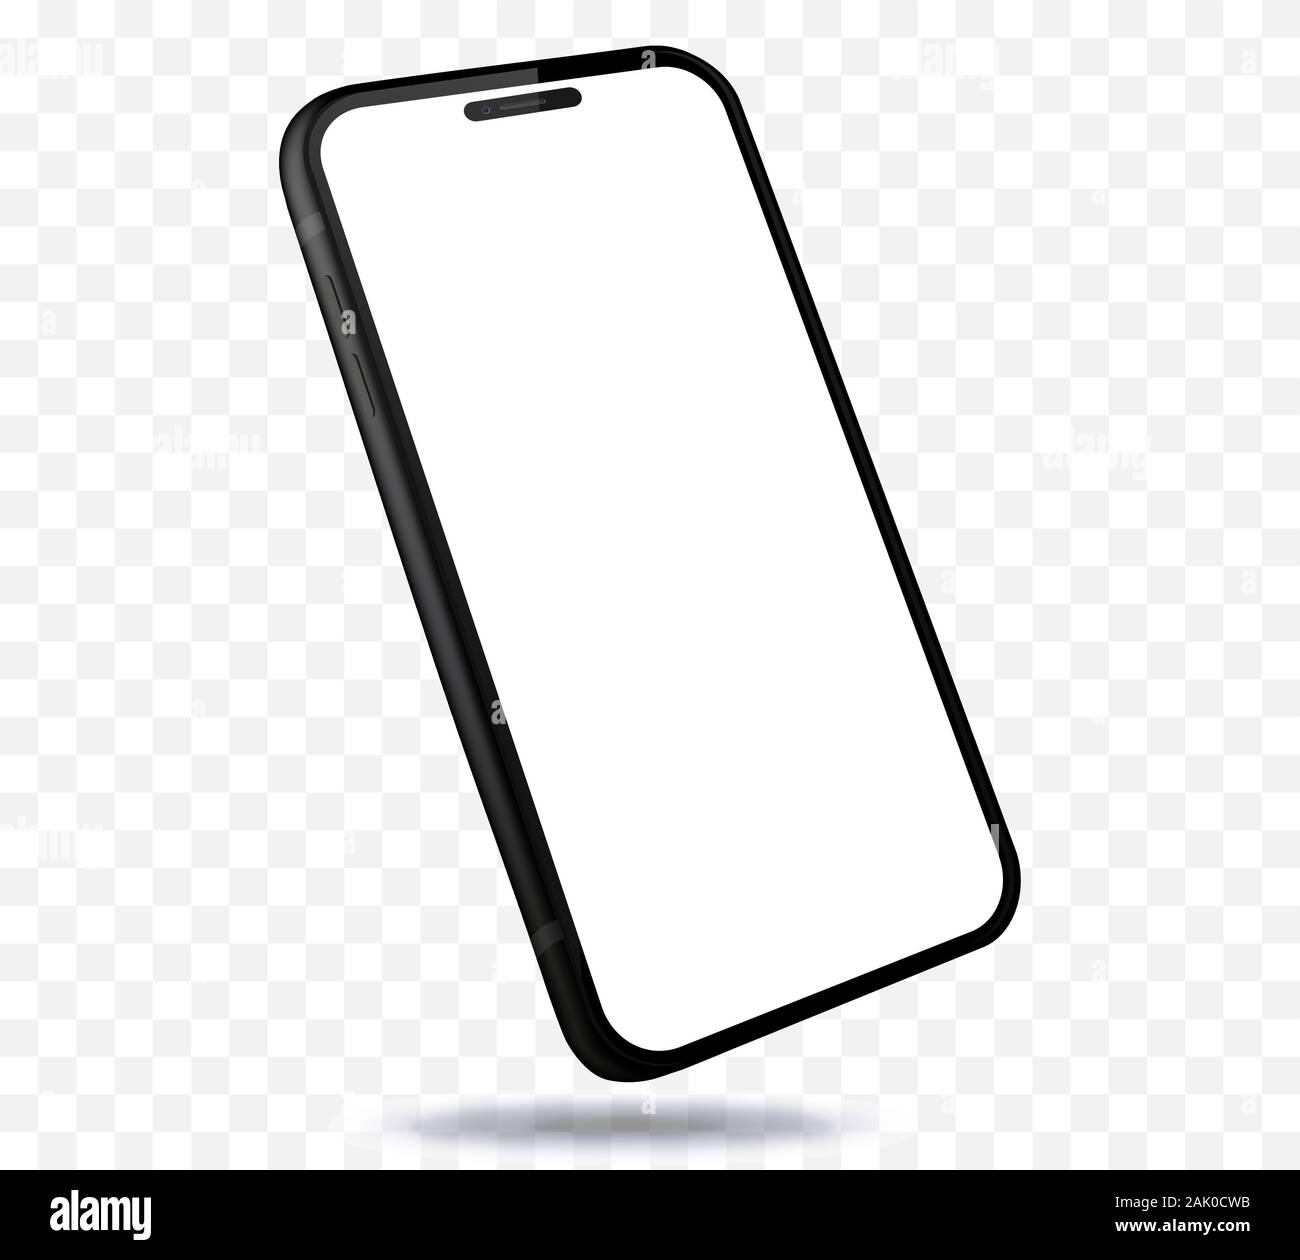 Mobile Phone Mockup With Perspective View. Black Smartphone Isolated on Transparent Background. Stock Vector